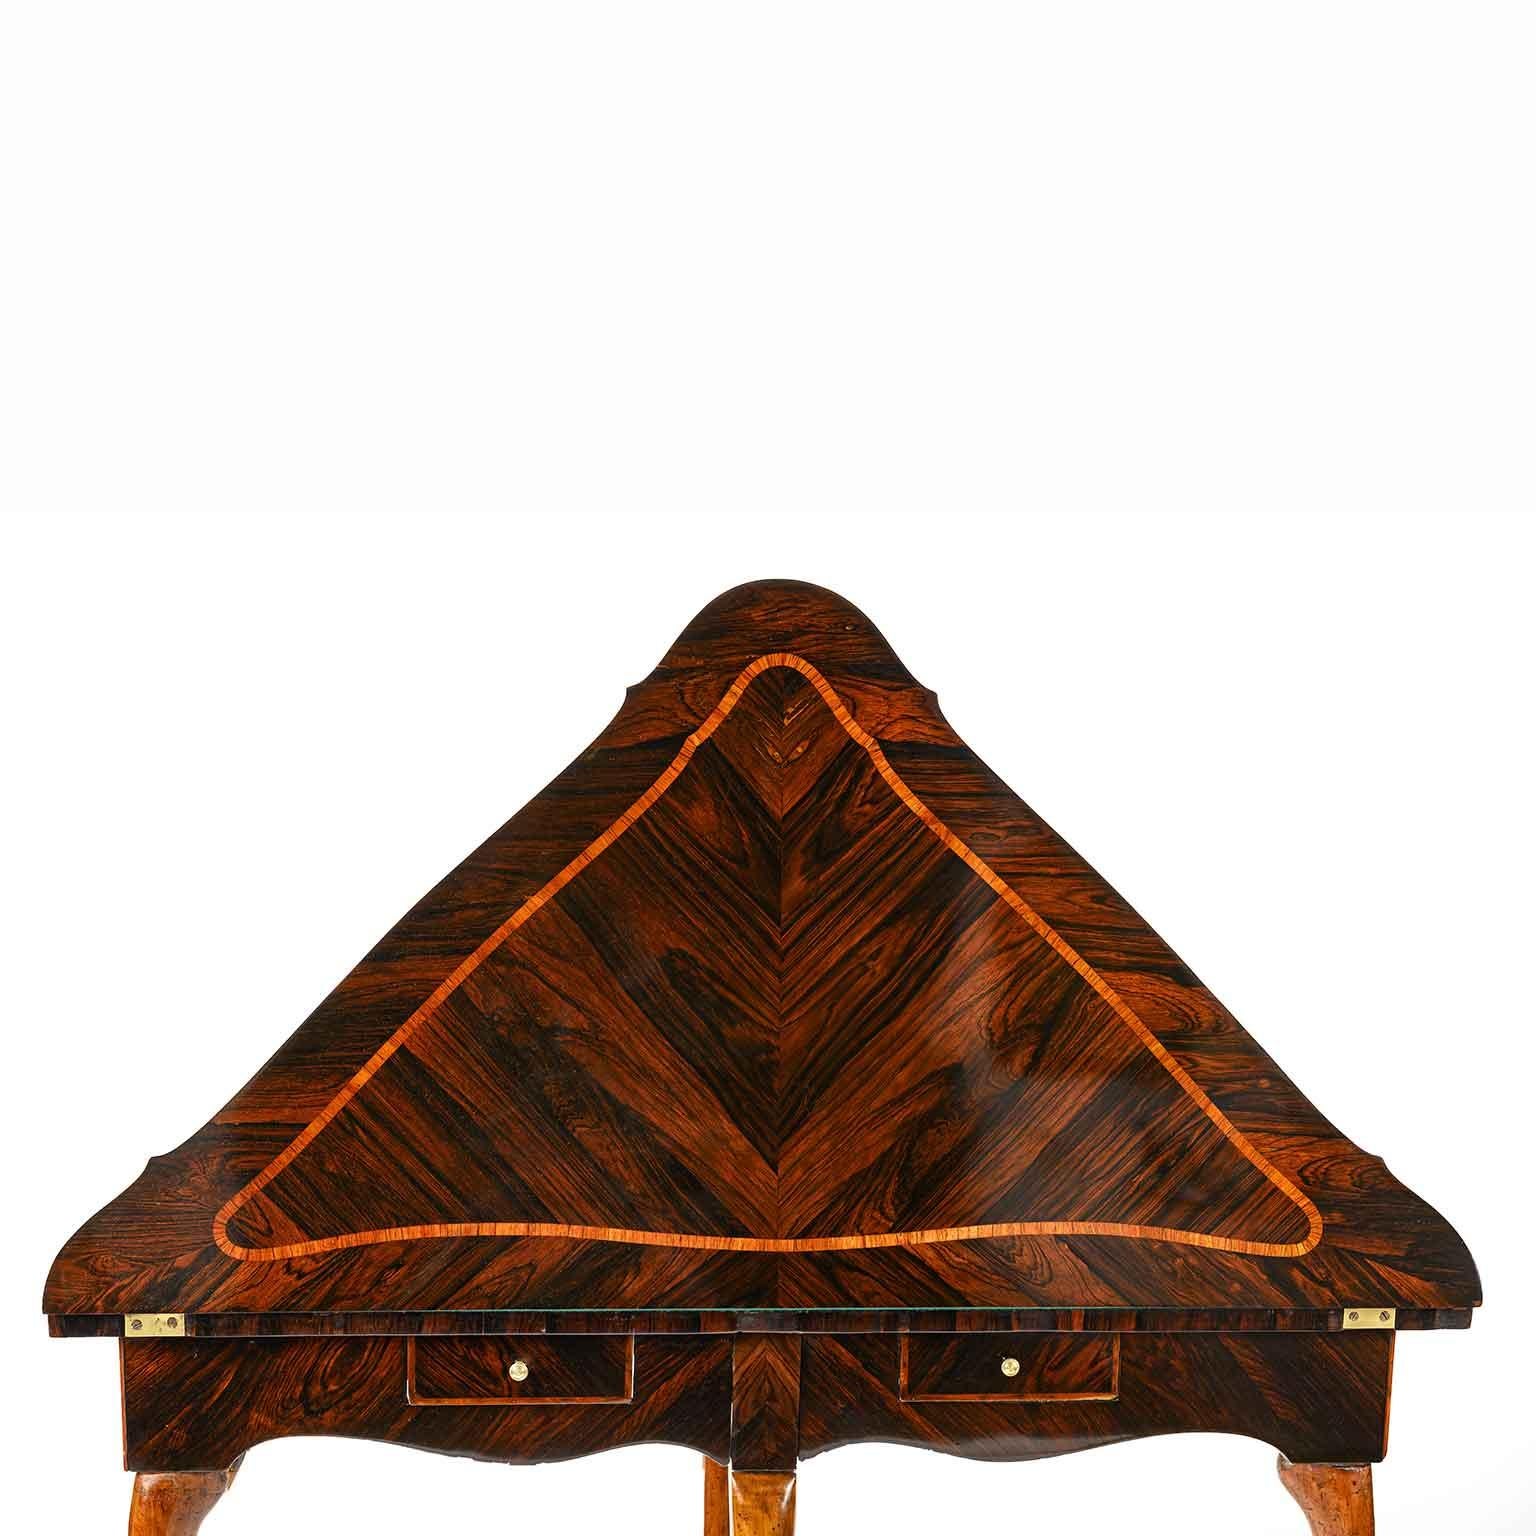 Exclusive Louis XIV Italian Genoese corner card table realized in rosewood and bois de rose, this elegant antique fold over game table dates back to the third quarter of 18th century, 1760 circa.
Two small drawers on the frontal shaped apron